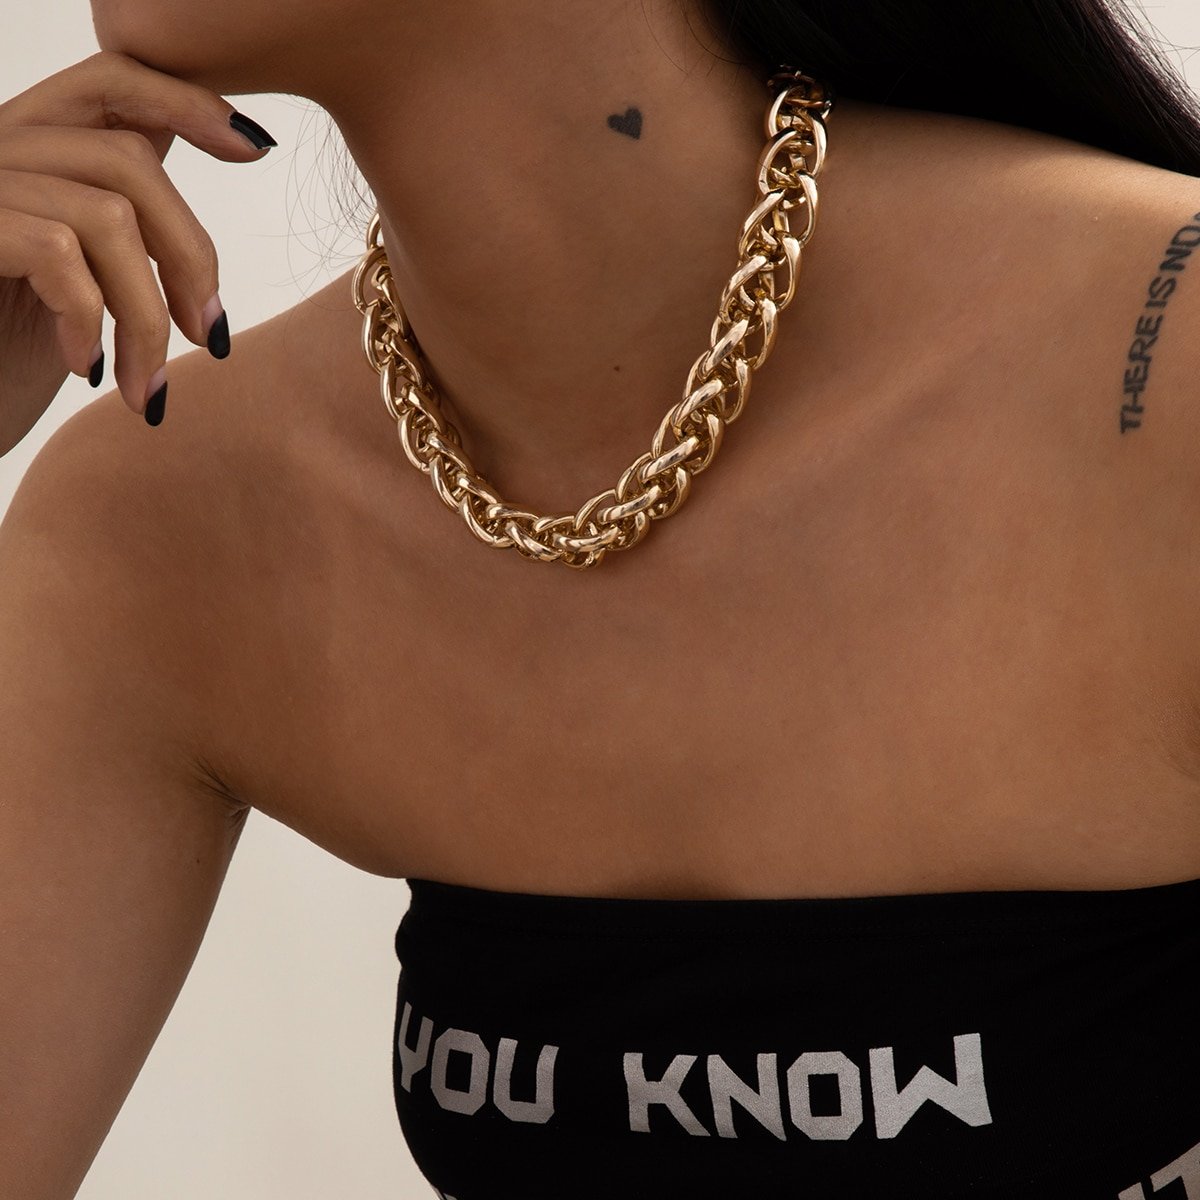 A woman wearing a black tank top and a Stylish Women's Thick Gold Chain Necklace.